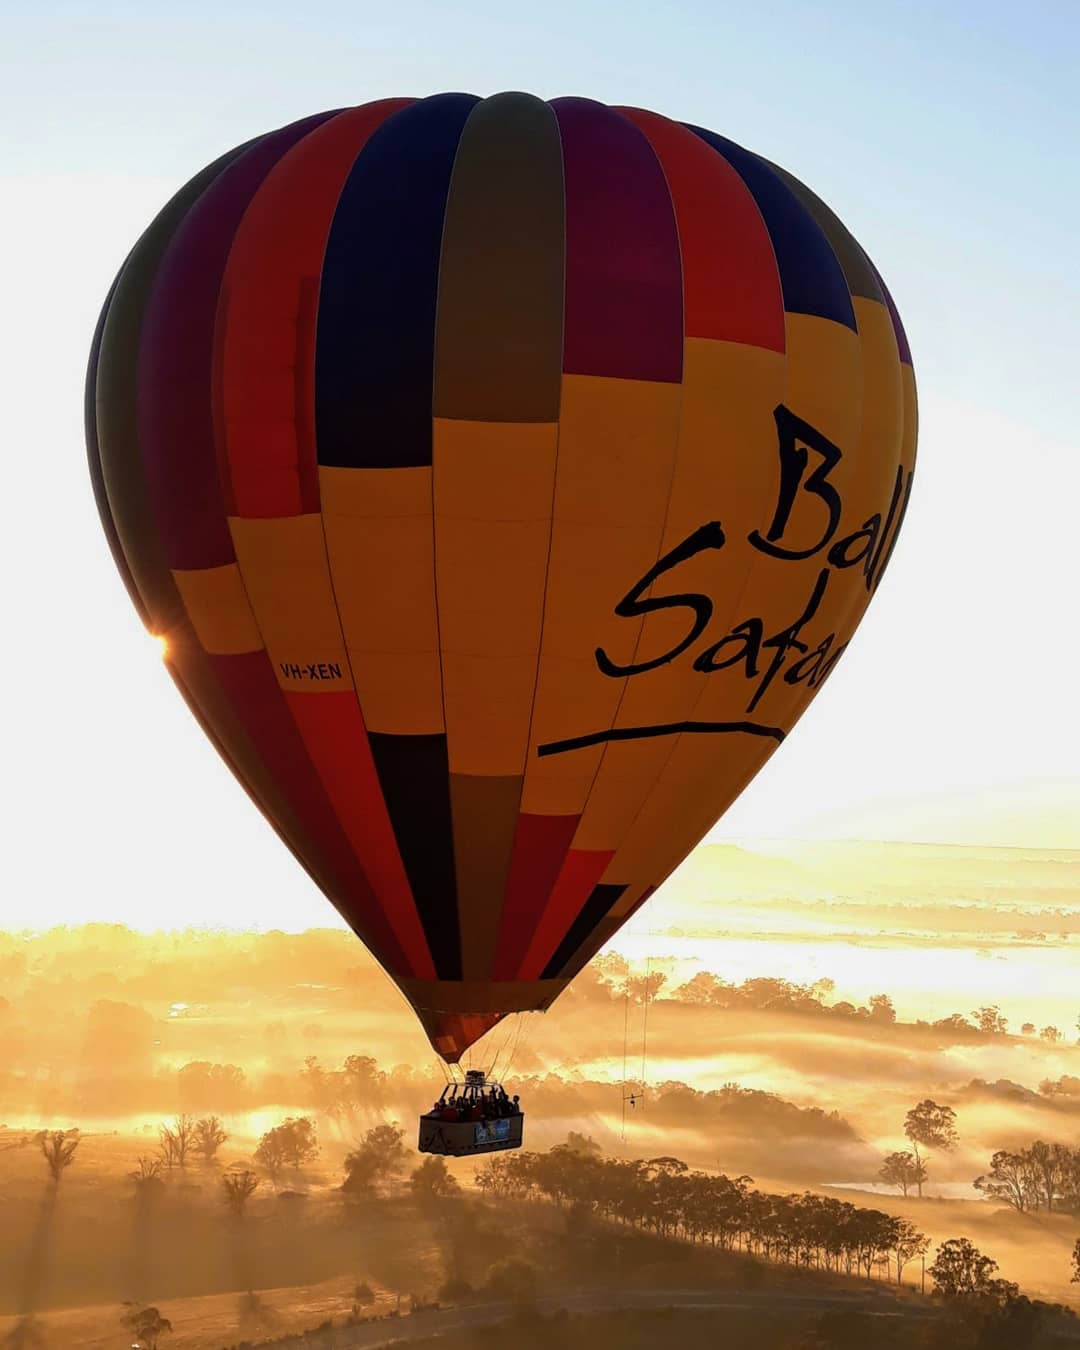 Things to do in New South Wales - hot air balloon camden valley